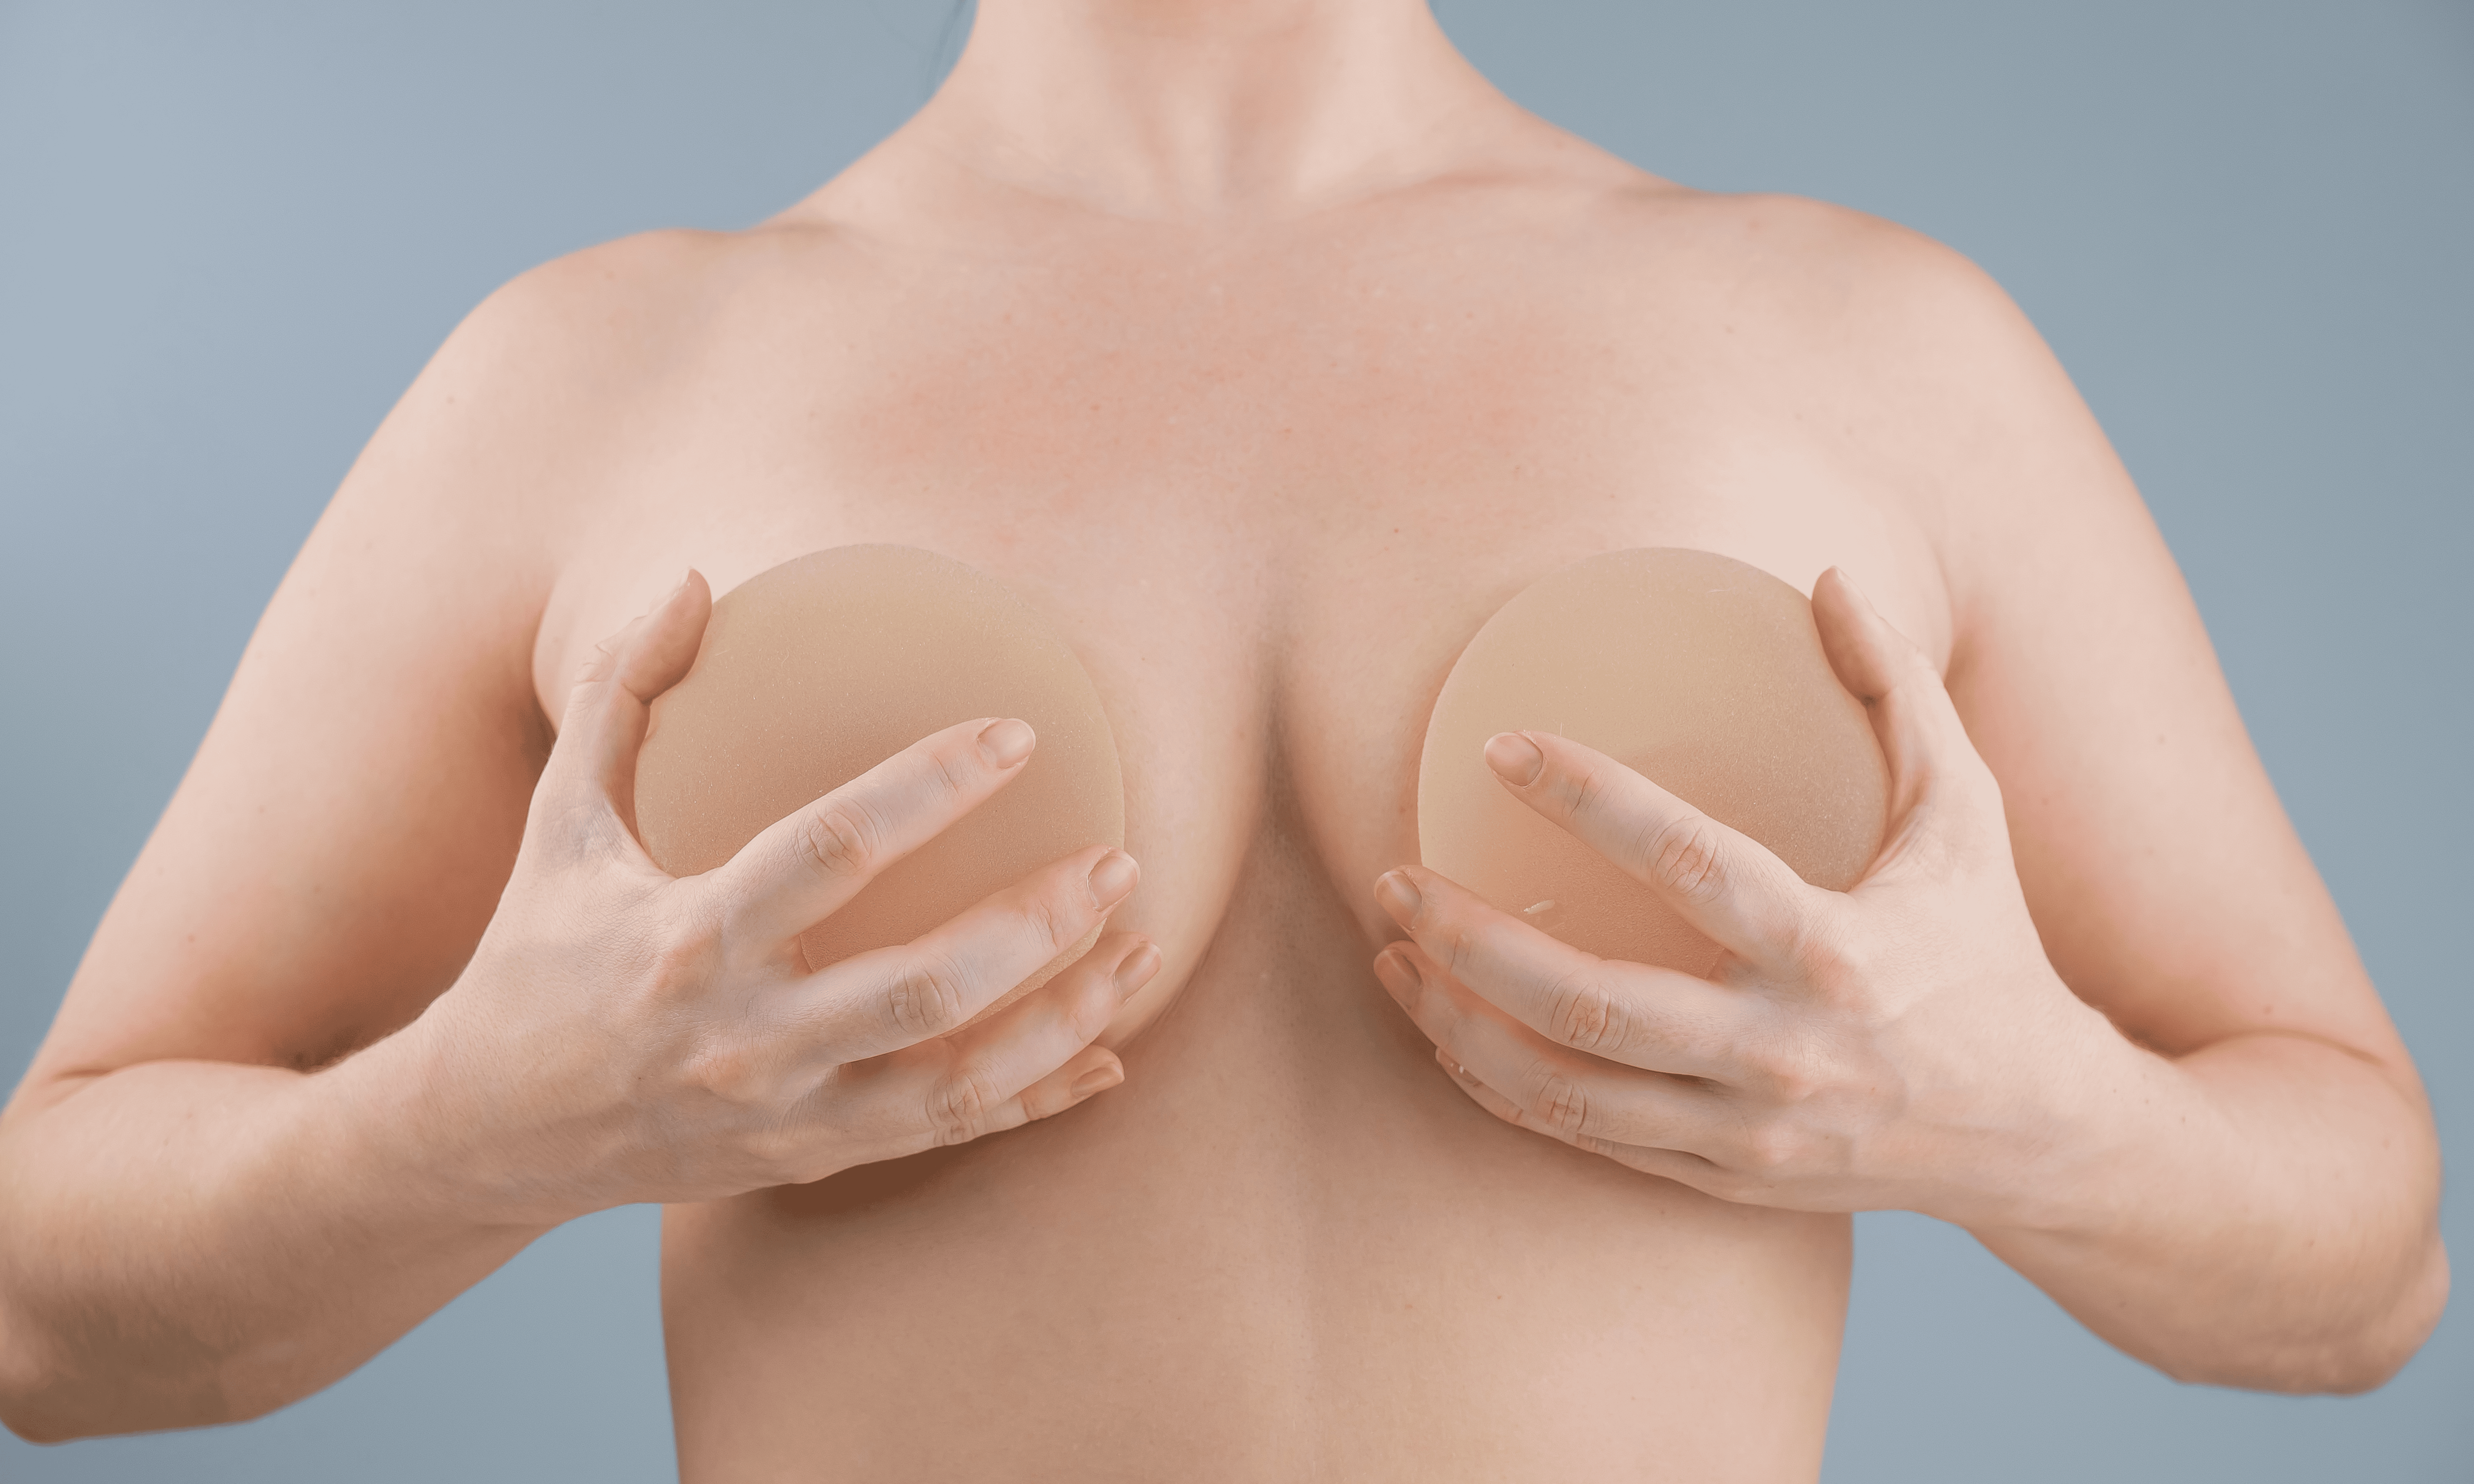 Types of breast implants: Which one should you choose?